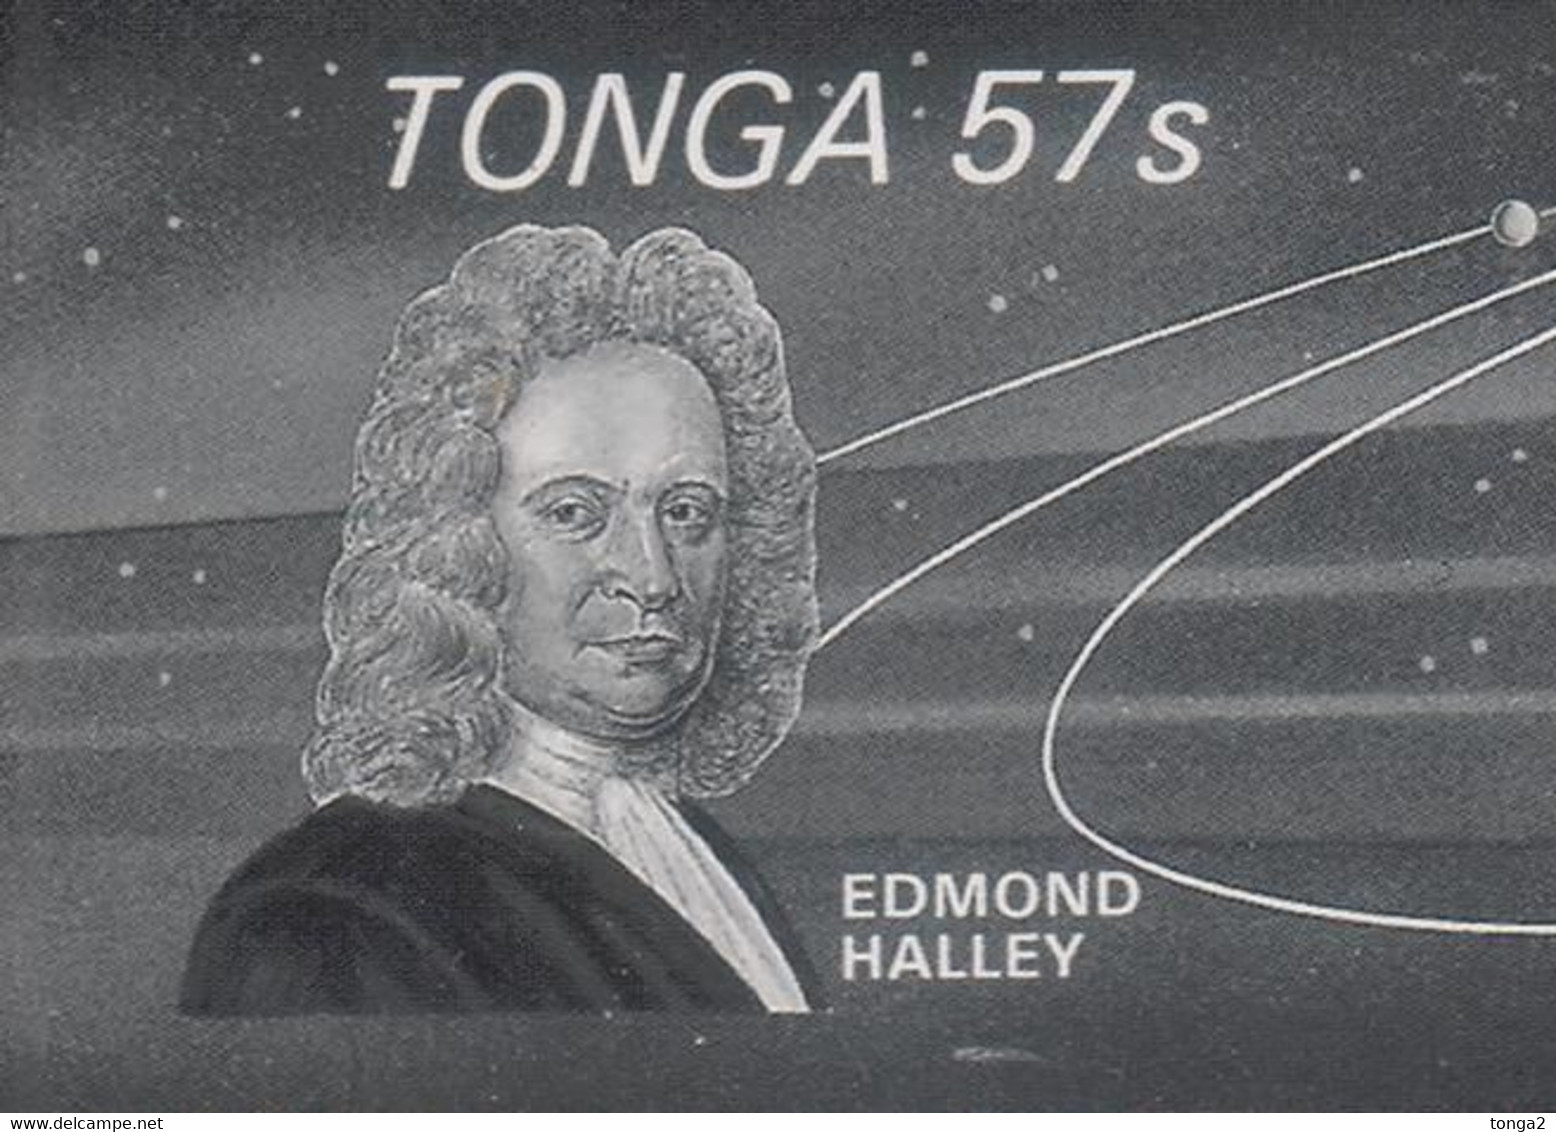 Tonga 1986 Proof In Black & White - 57s Halley - Read Description - Oceania